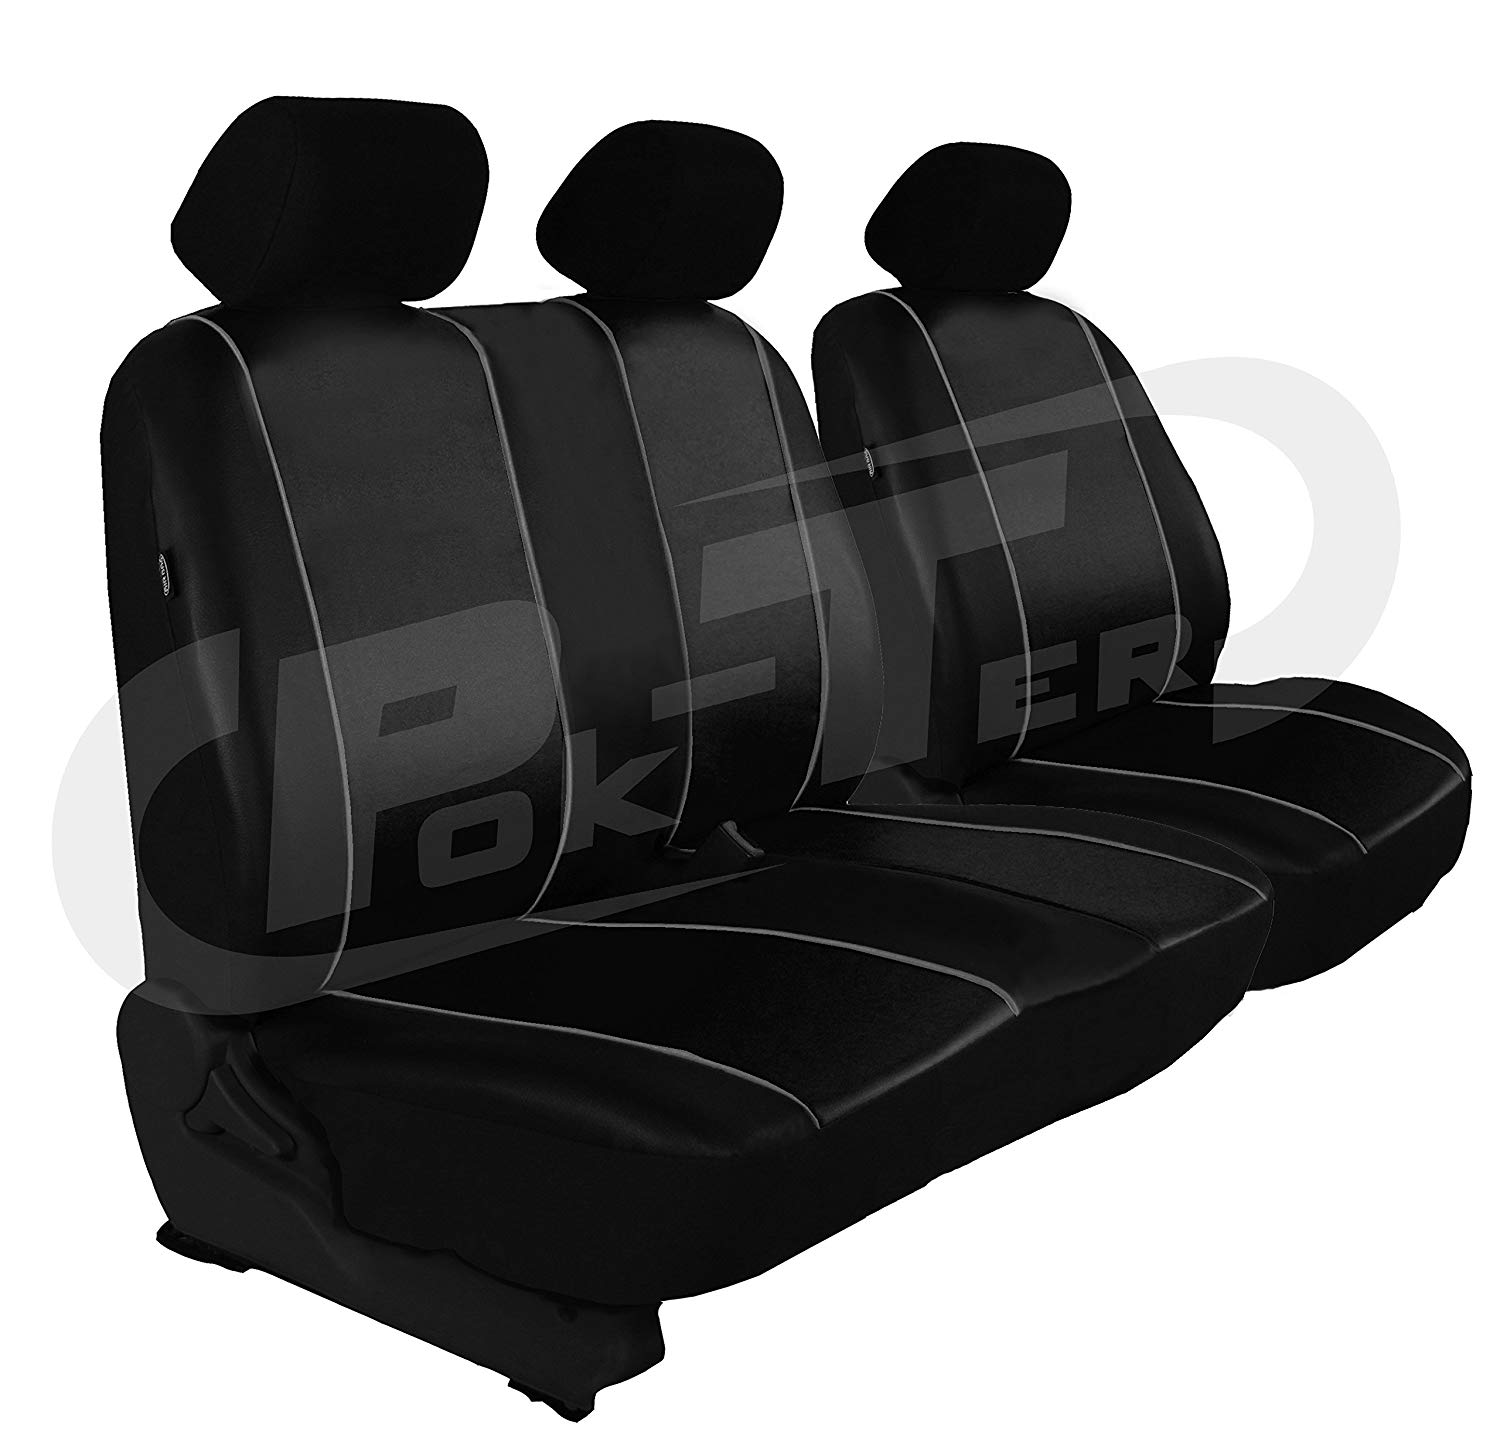 Customised Talento 2016 Driver\'s Seat + 2 Passenger Seat Imitation Leather Seat Cover. Colour: Black.